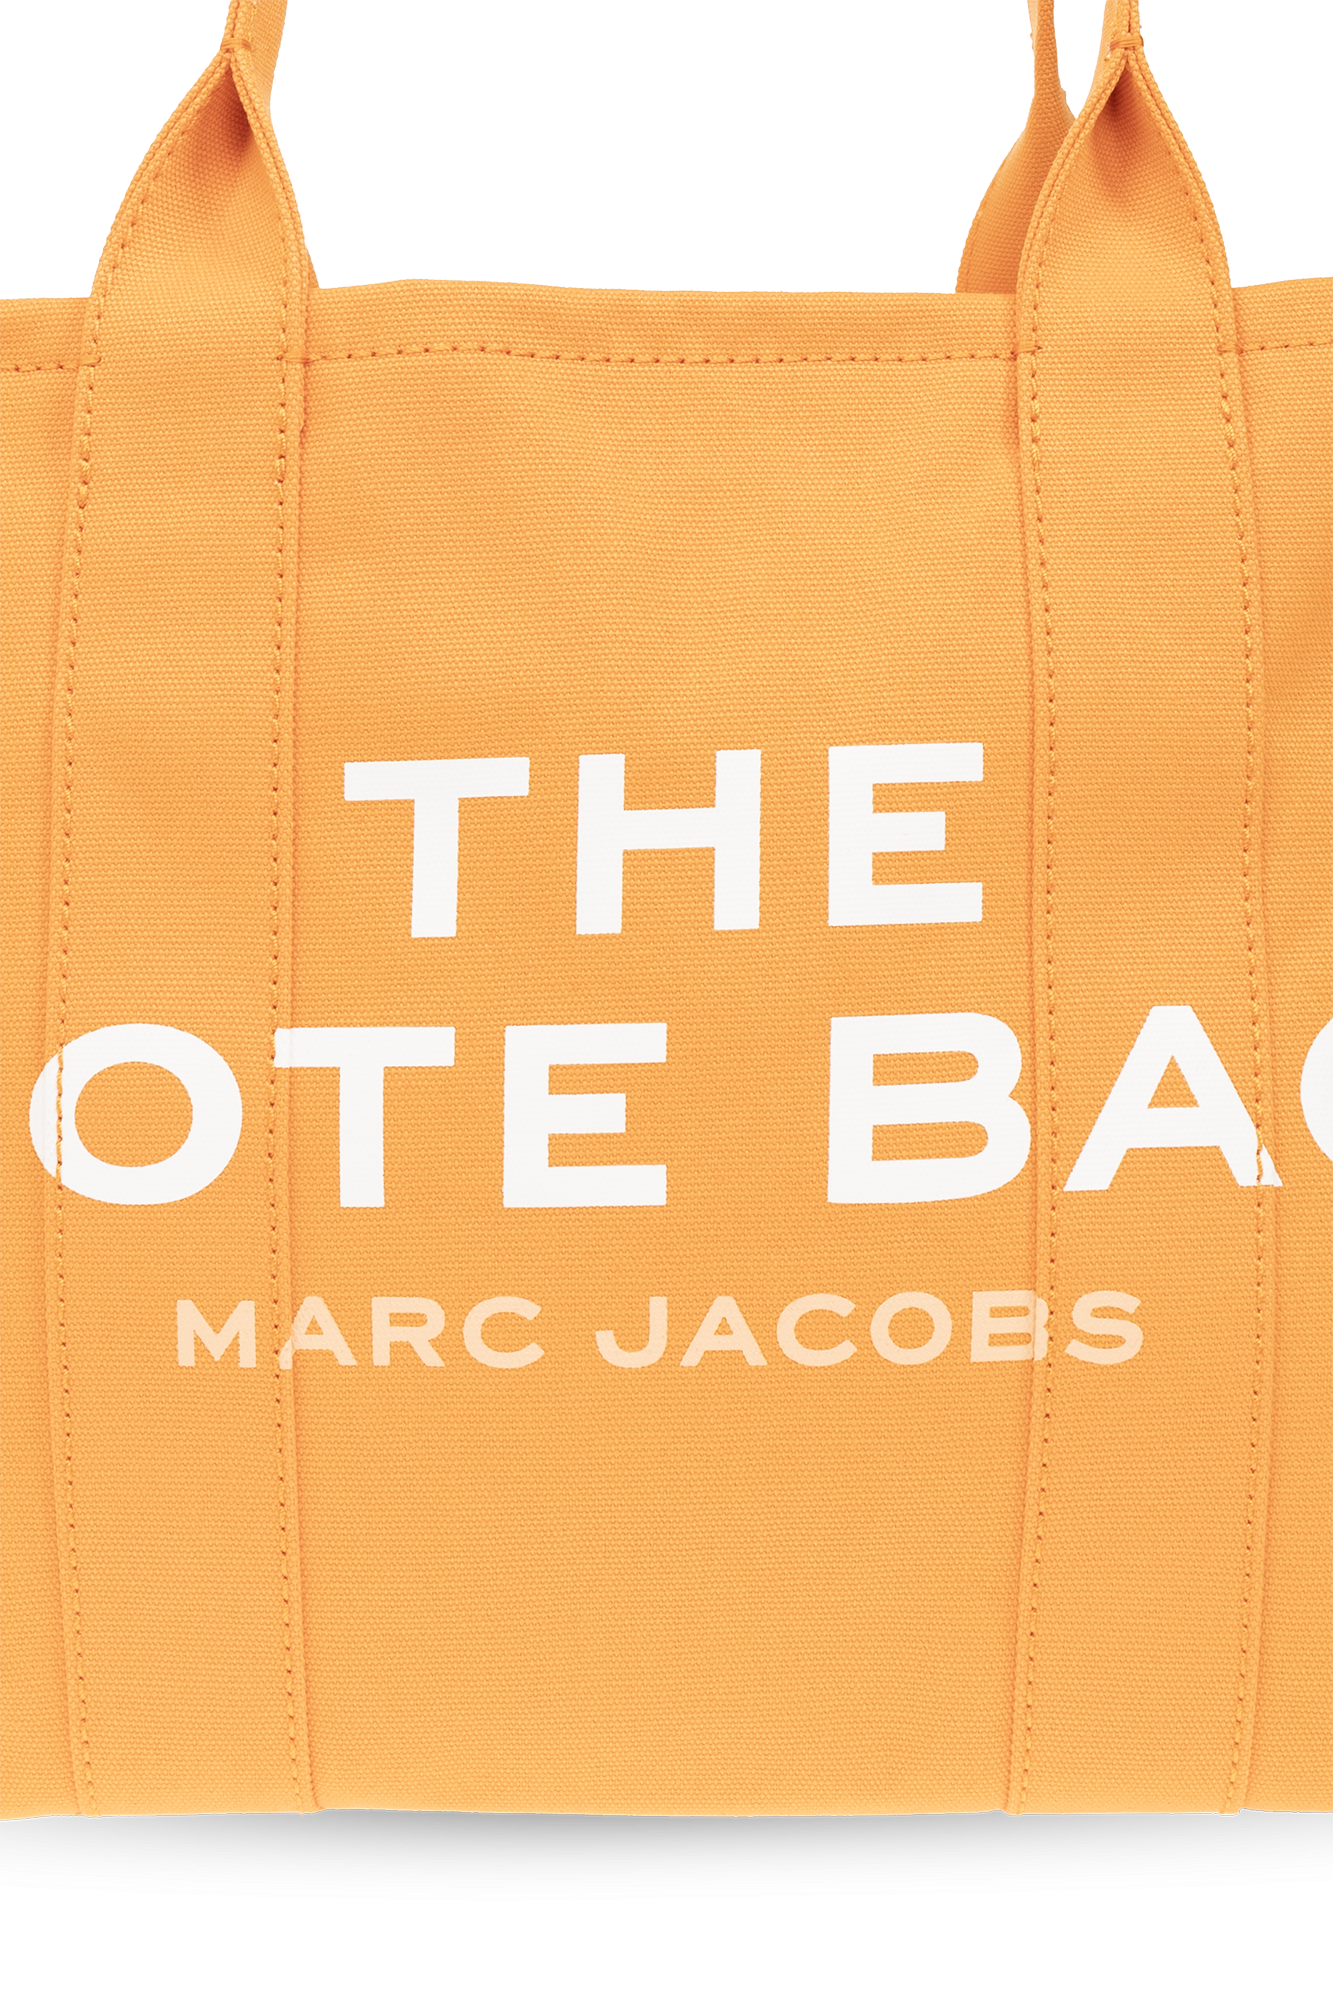 Marc Jacobs ‘The Tote Large’ Shopper Bag